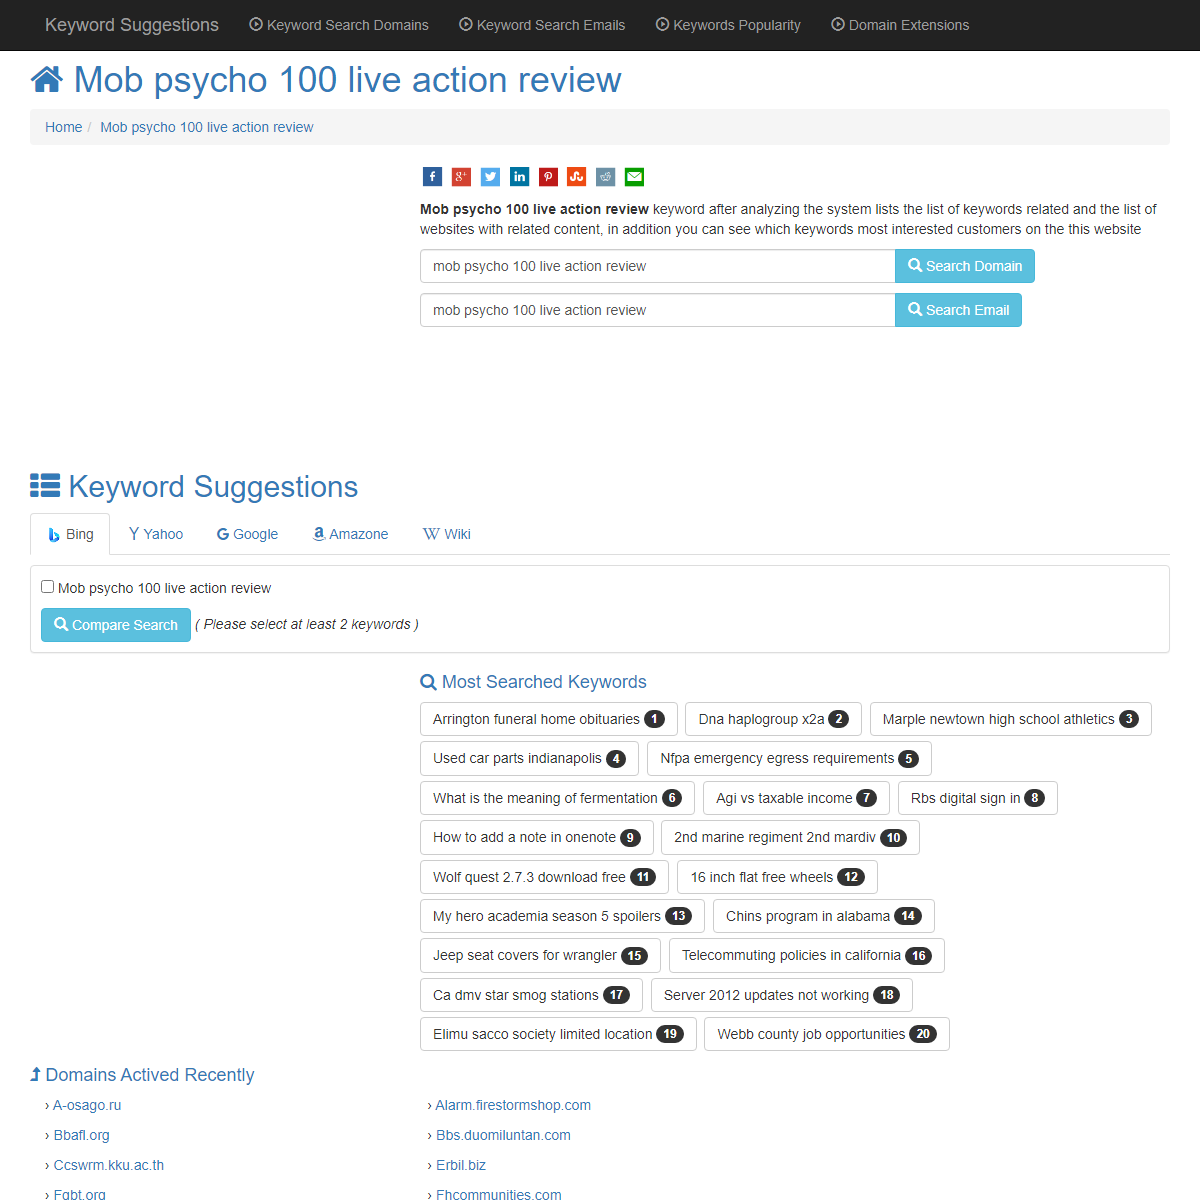 A complete backup of https://www.keyword-suggest-tool.com/search/mob+psycho+100+live+action+review/